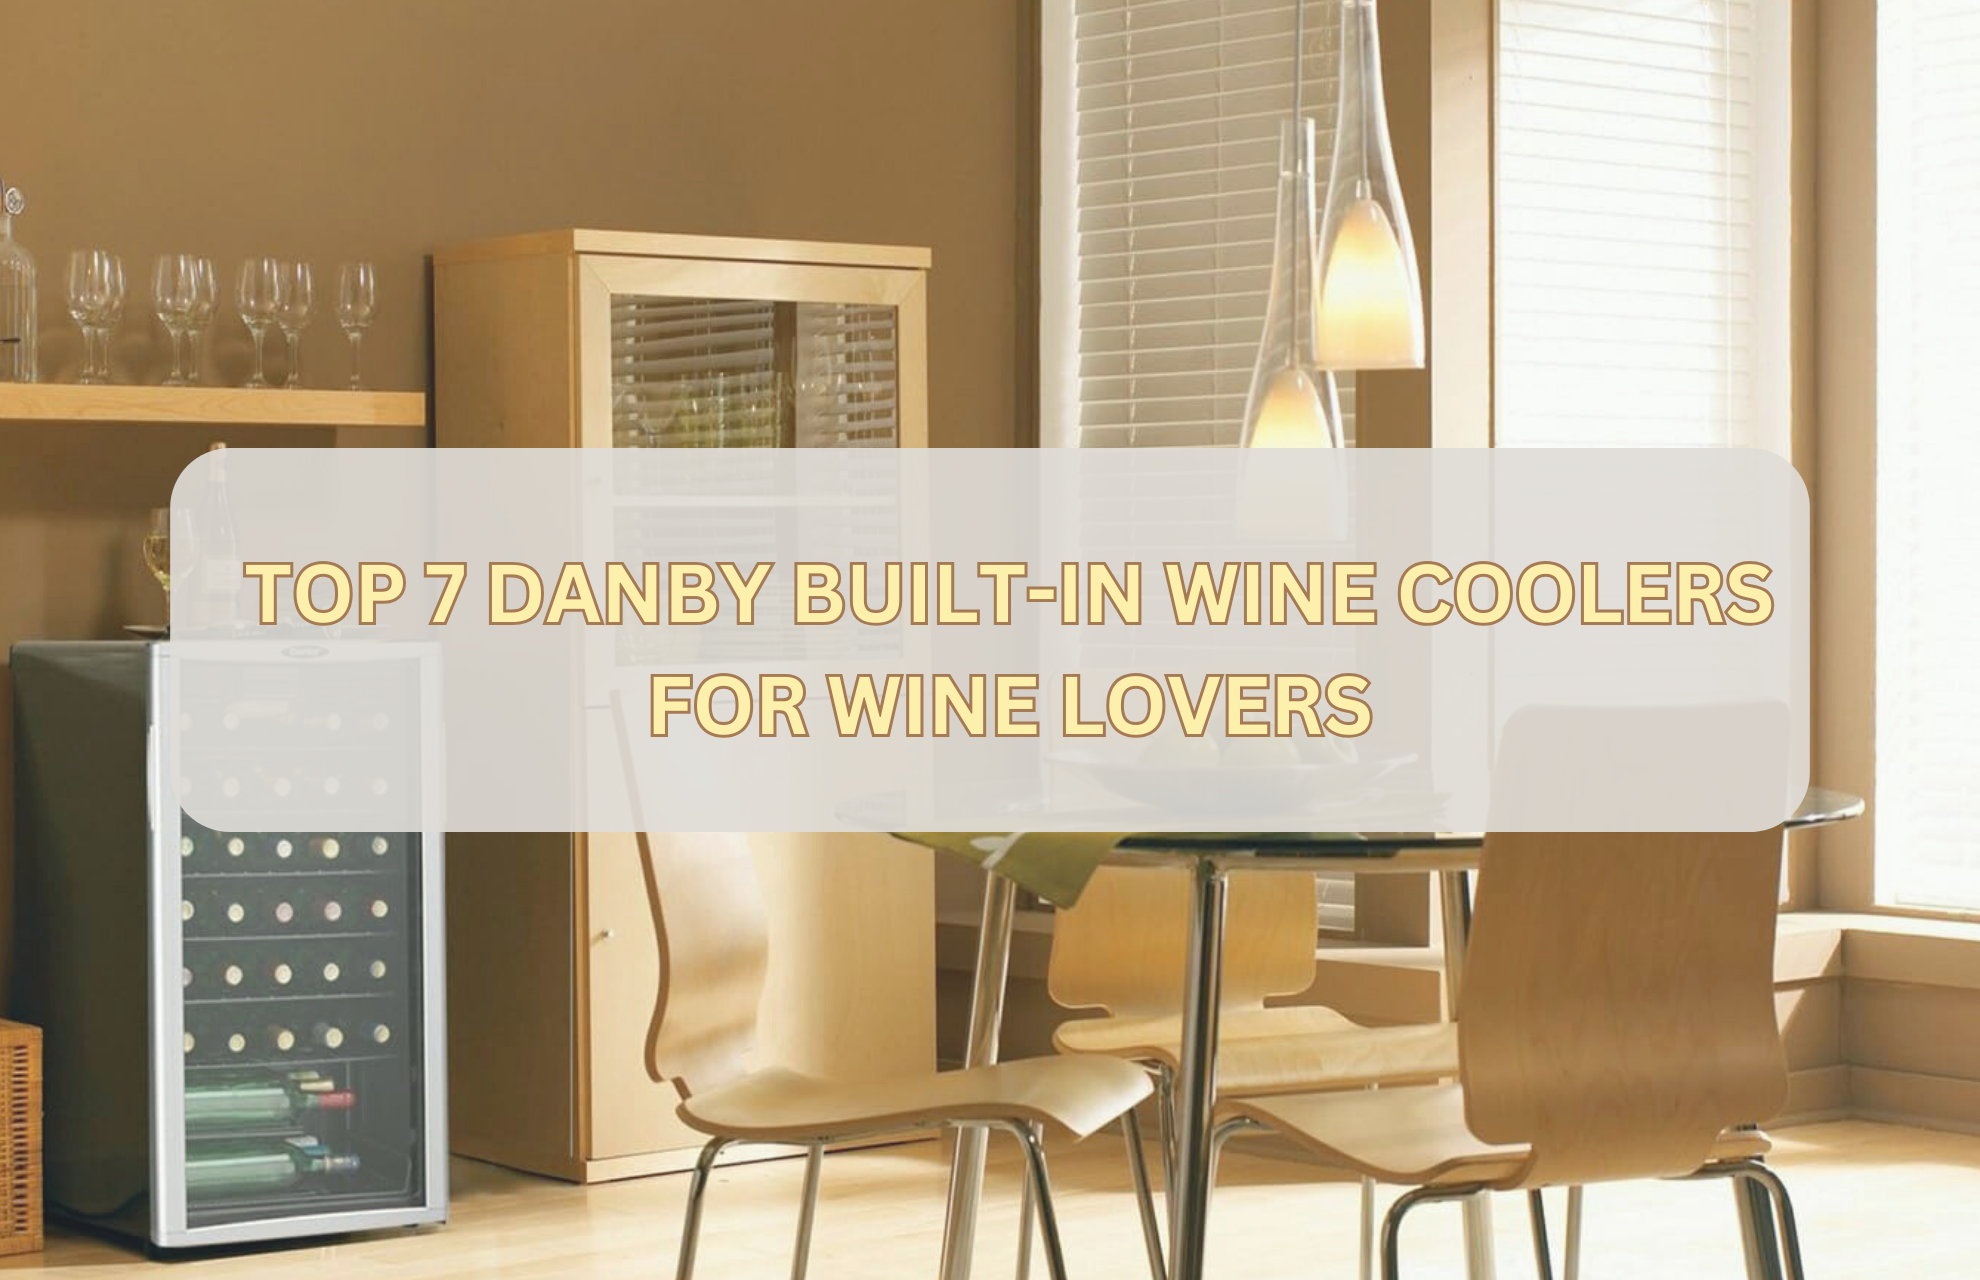 TOP DANBY BUILT-IN WINE COOLERS FOR WINE LOVERS